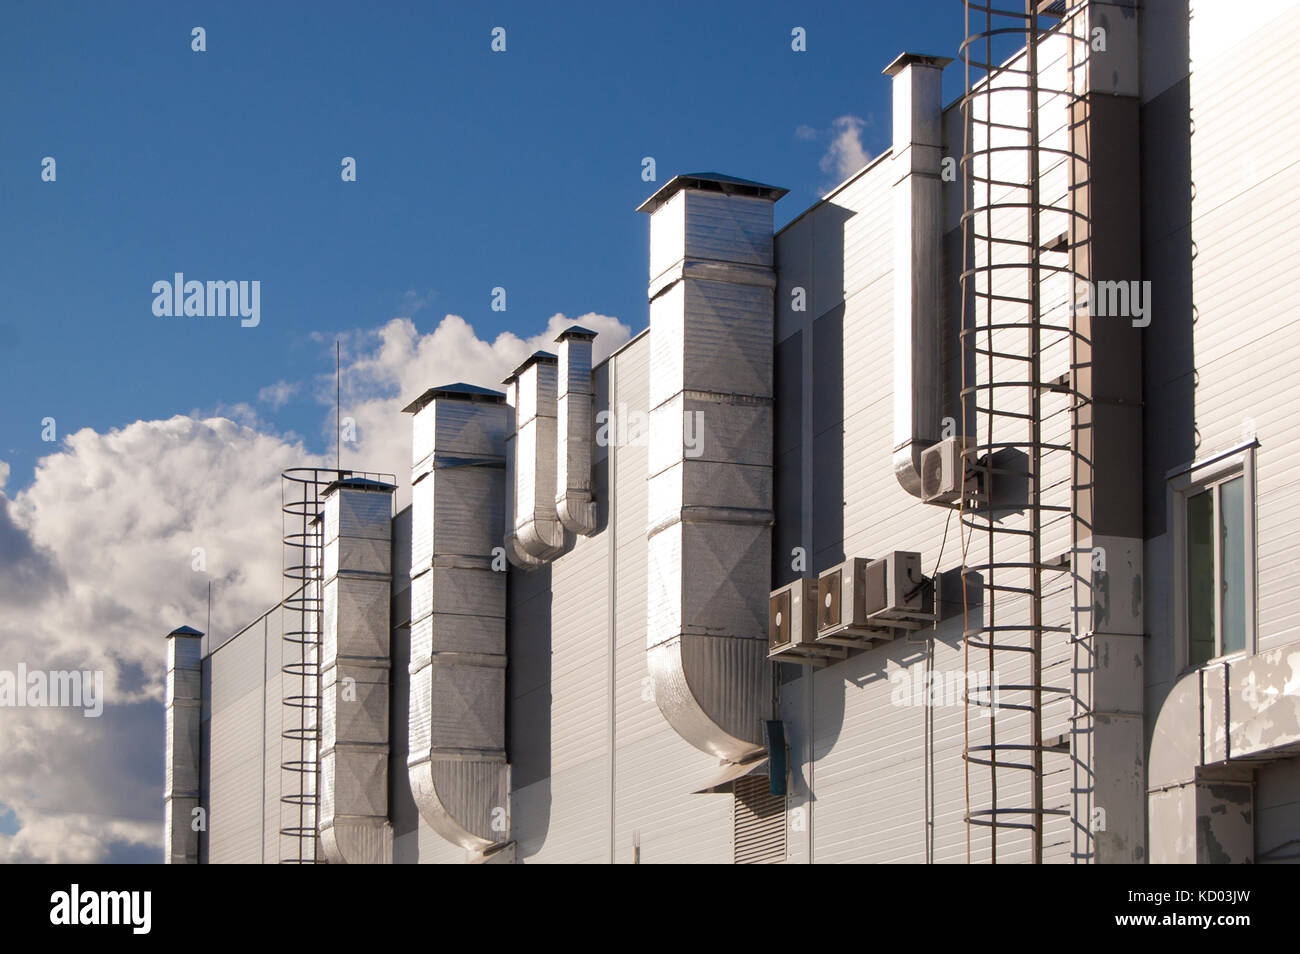 industrial building with ventilation pipes and air conditioners against the blue sky Stock Photo